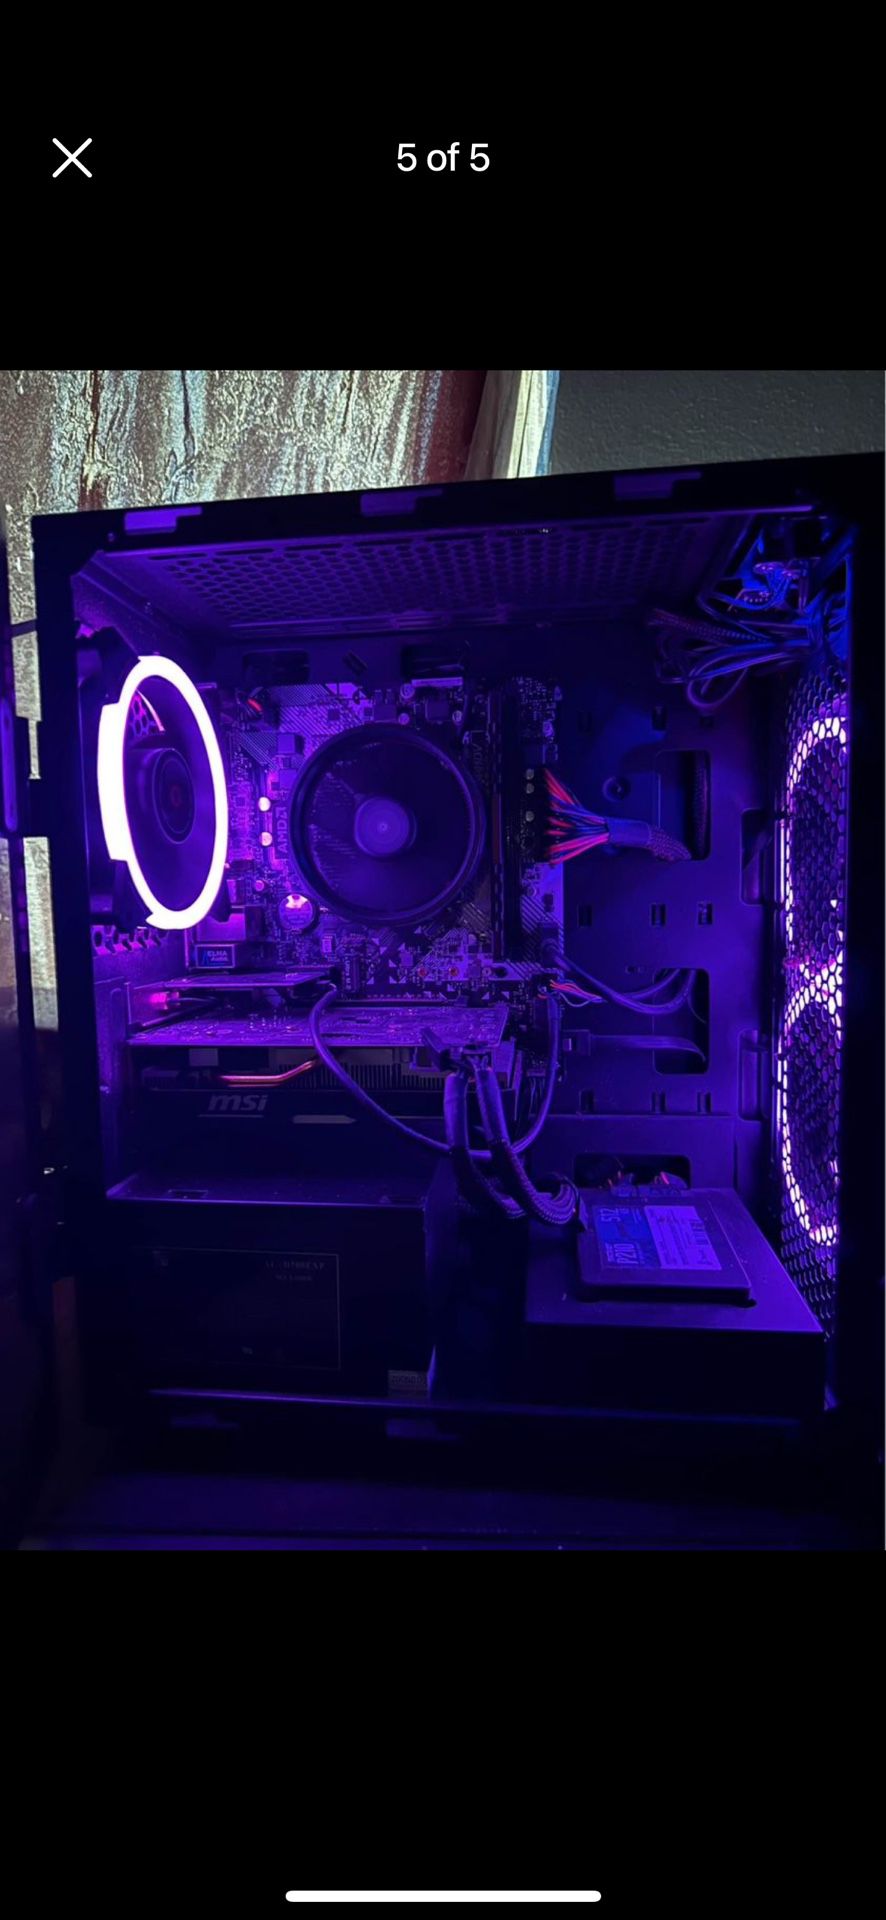 Custom hand crafted CLX Gaming Pc W/changeable LED lights.  